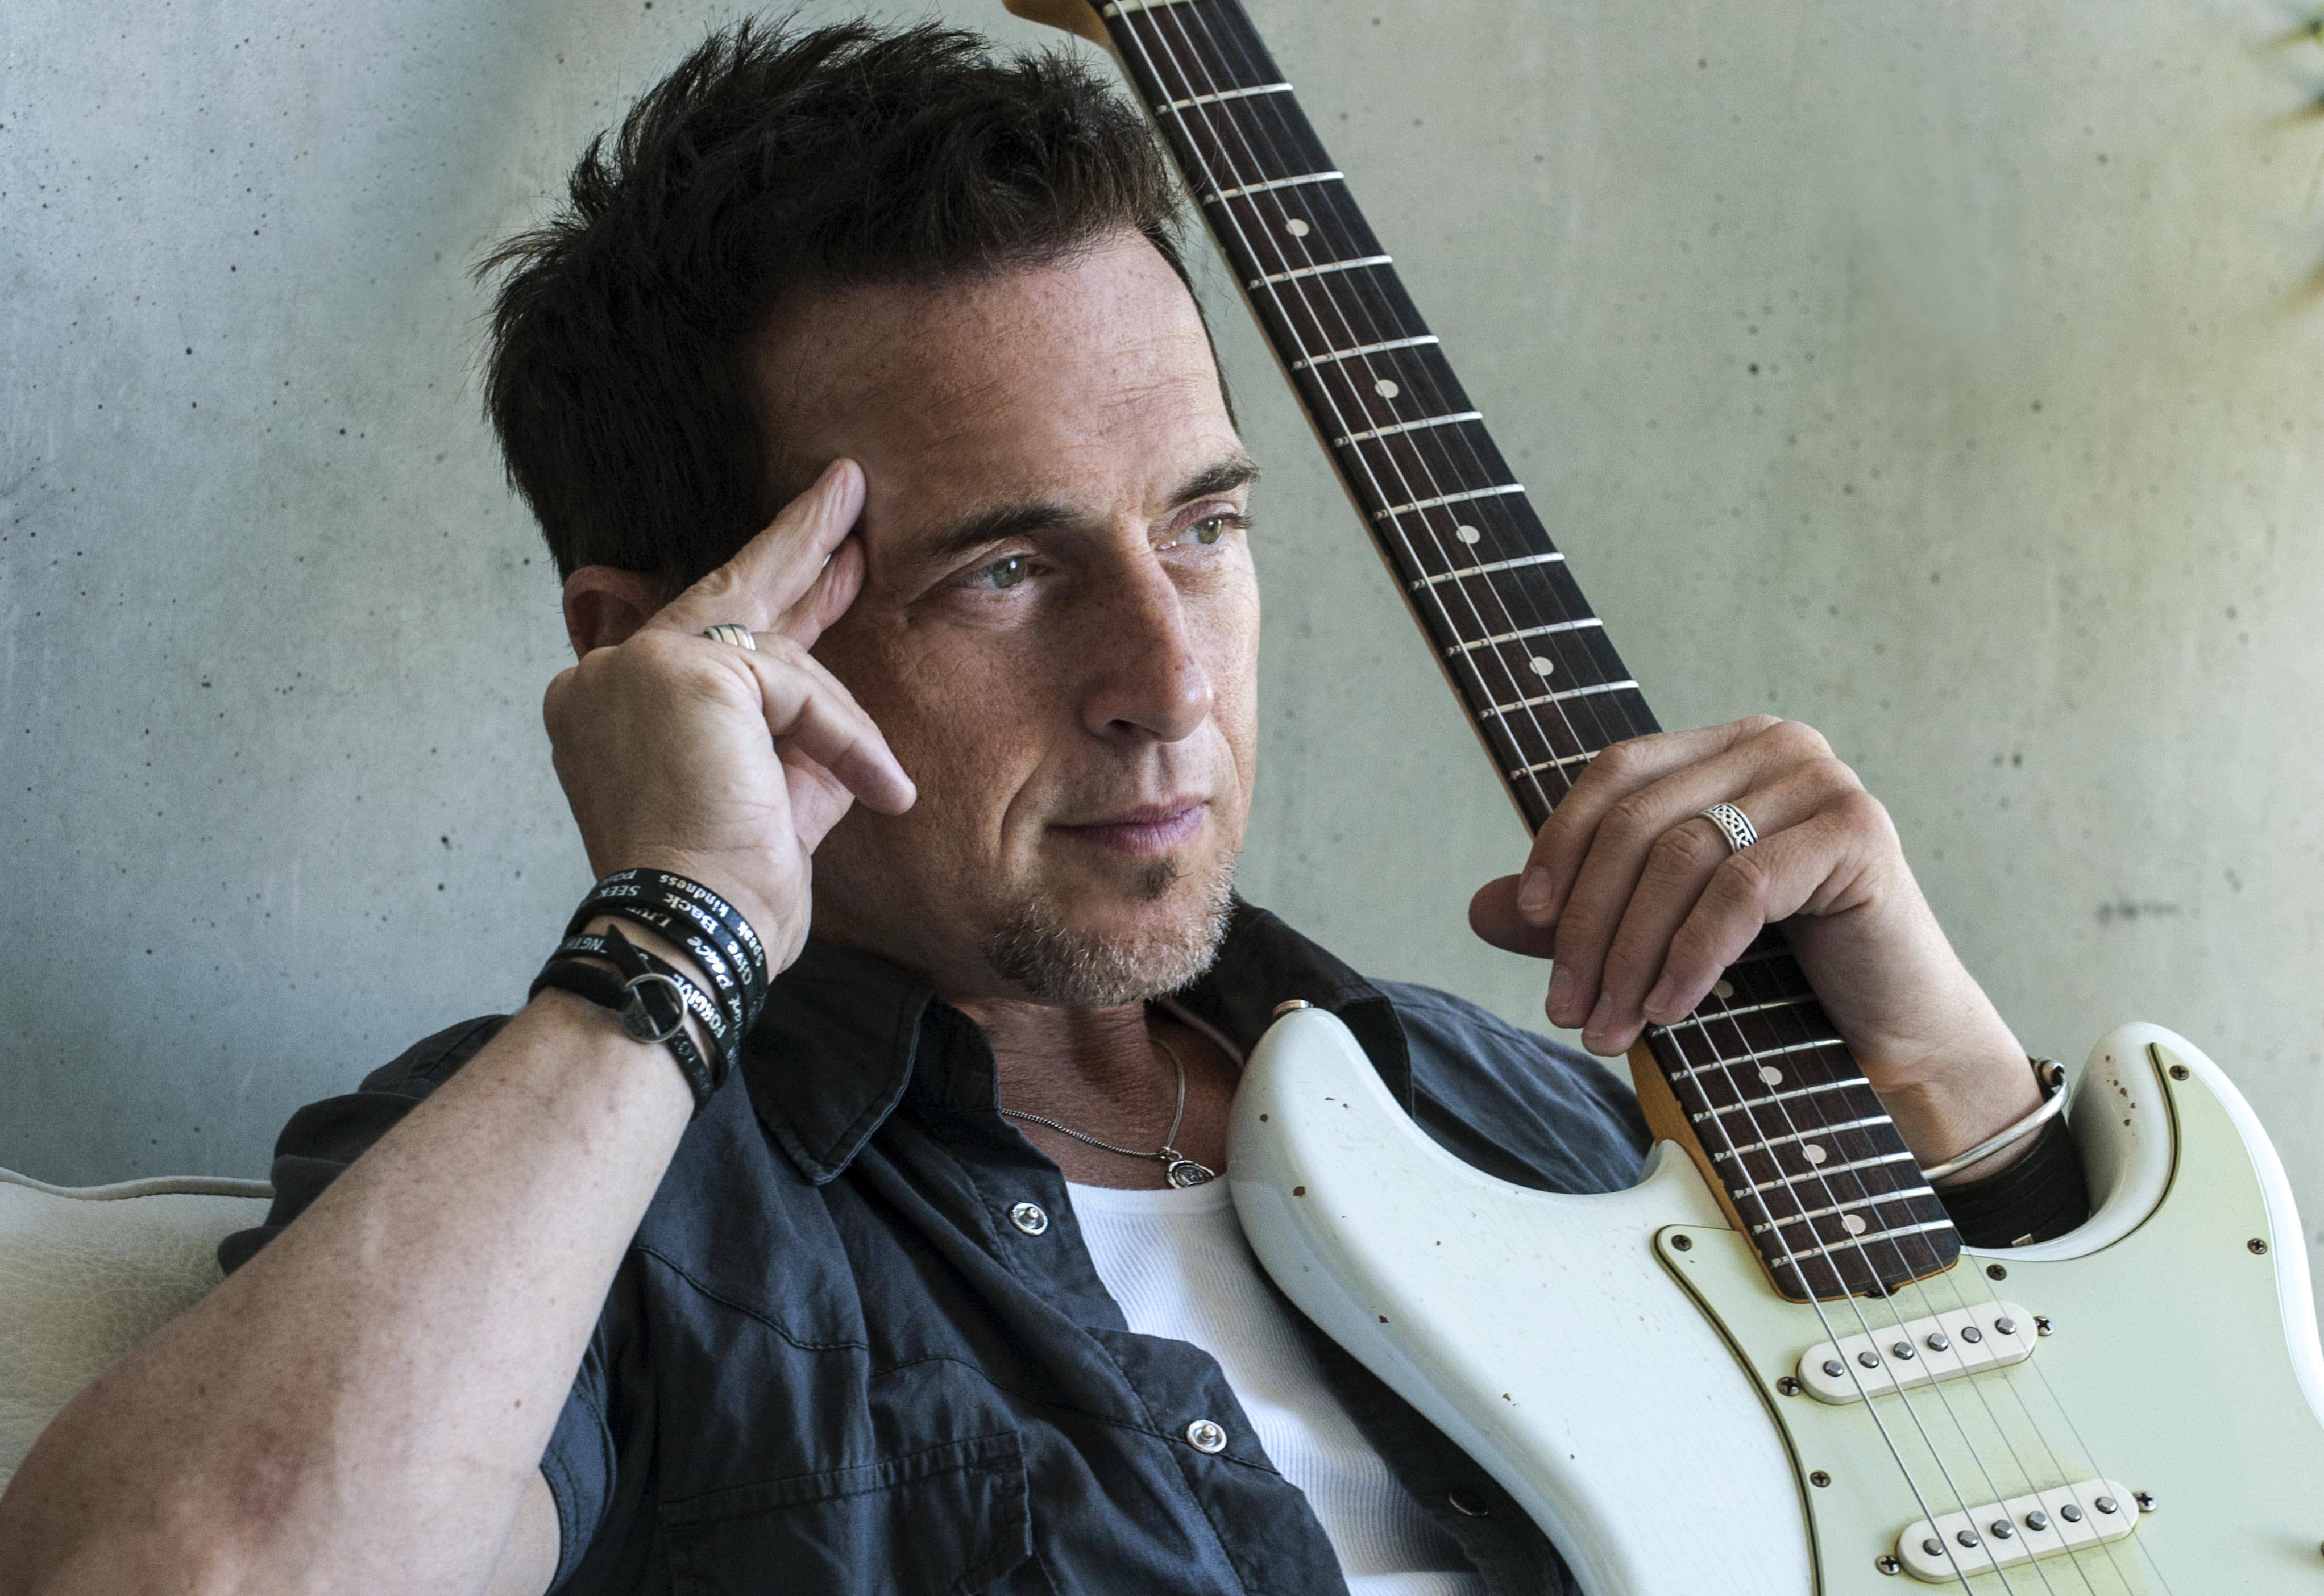 MAINSTAY – Singer/songwriter Colin James continues to create terrific tunes as featured on his latest disc Hearts on Fire. He performs at the Memorial Centre Wednesday evening.